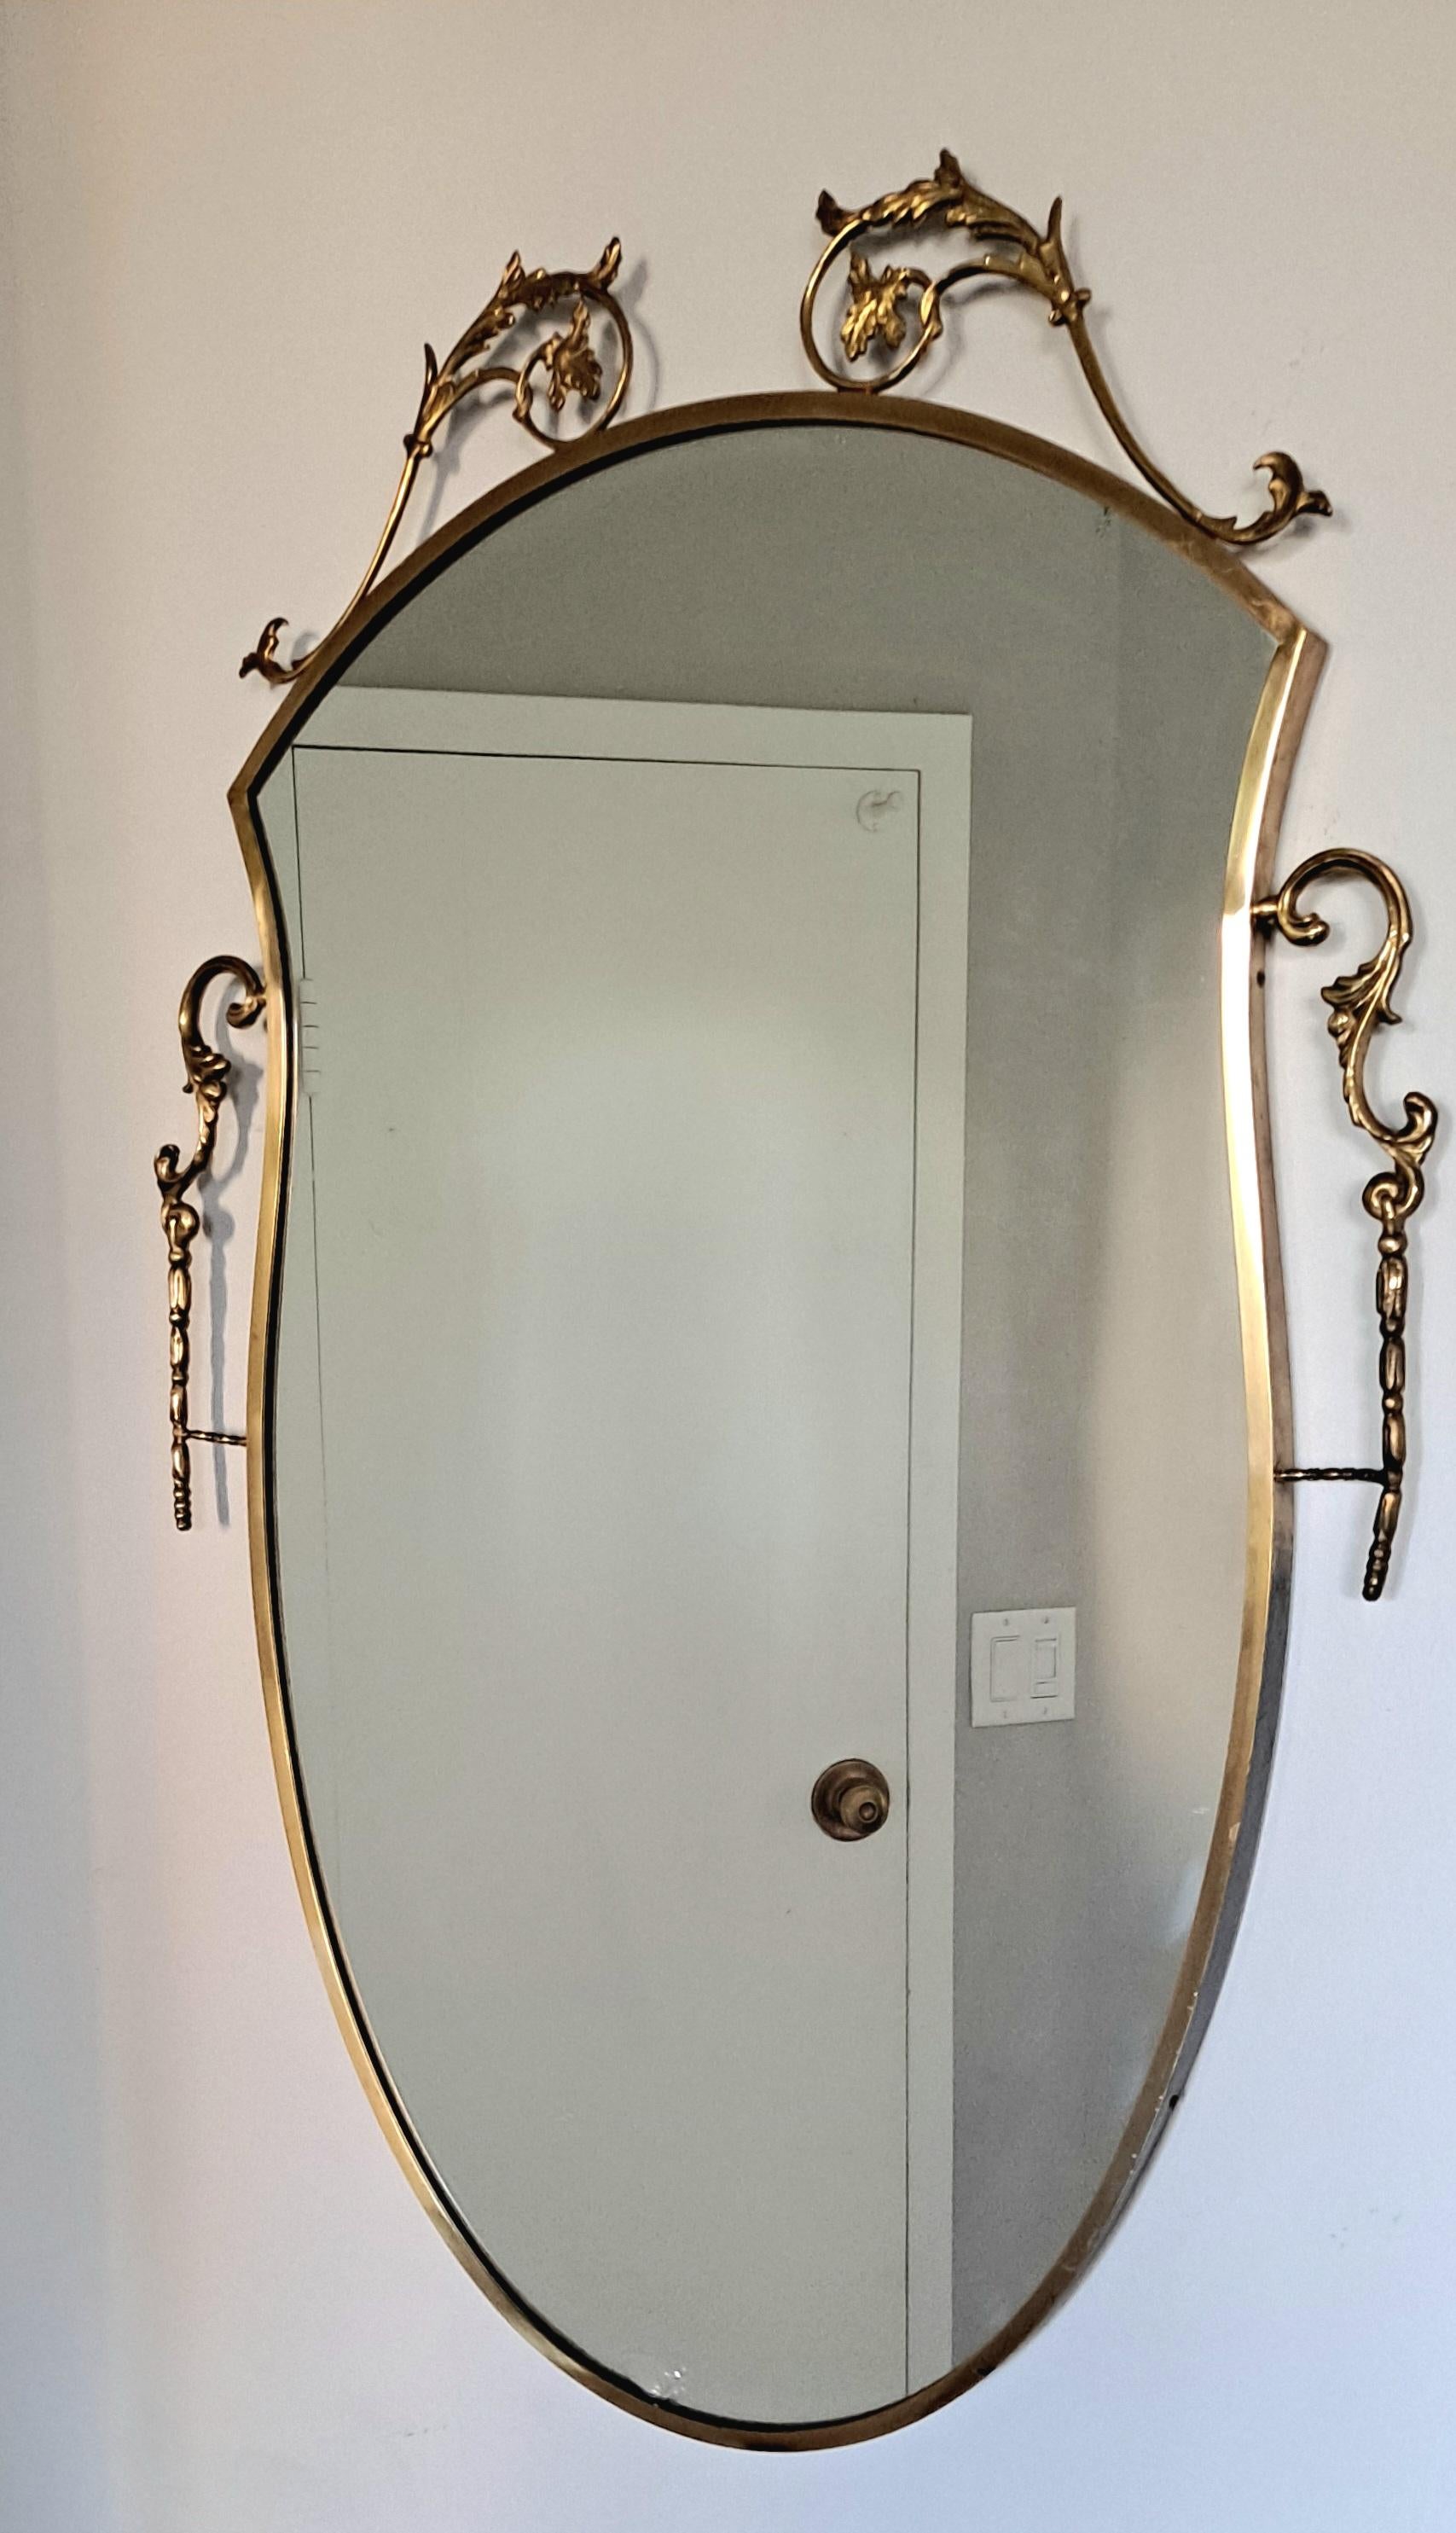 Italian Neoclassical style mirror is in original condition and extra ordinary look and quality made.